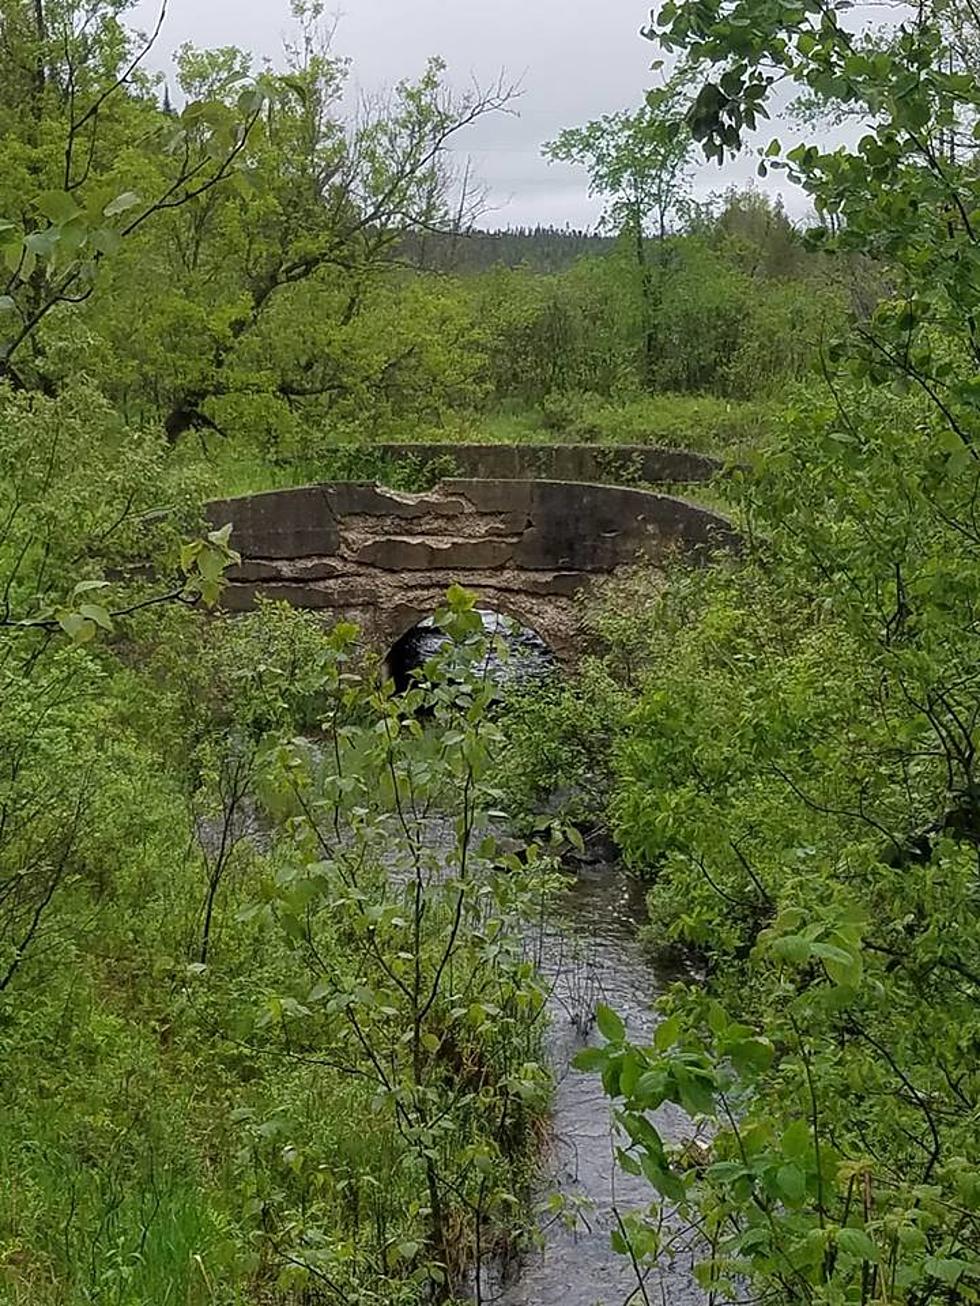 This Abandoned Bridge Was Once a Vital Link Across Michigan’s Upper Peninsula